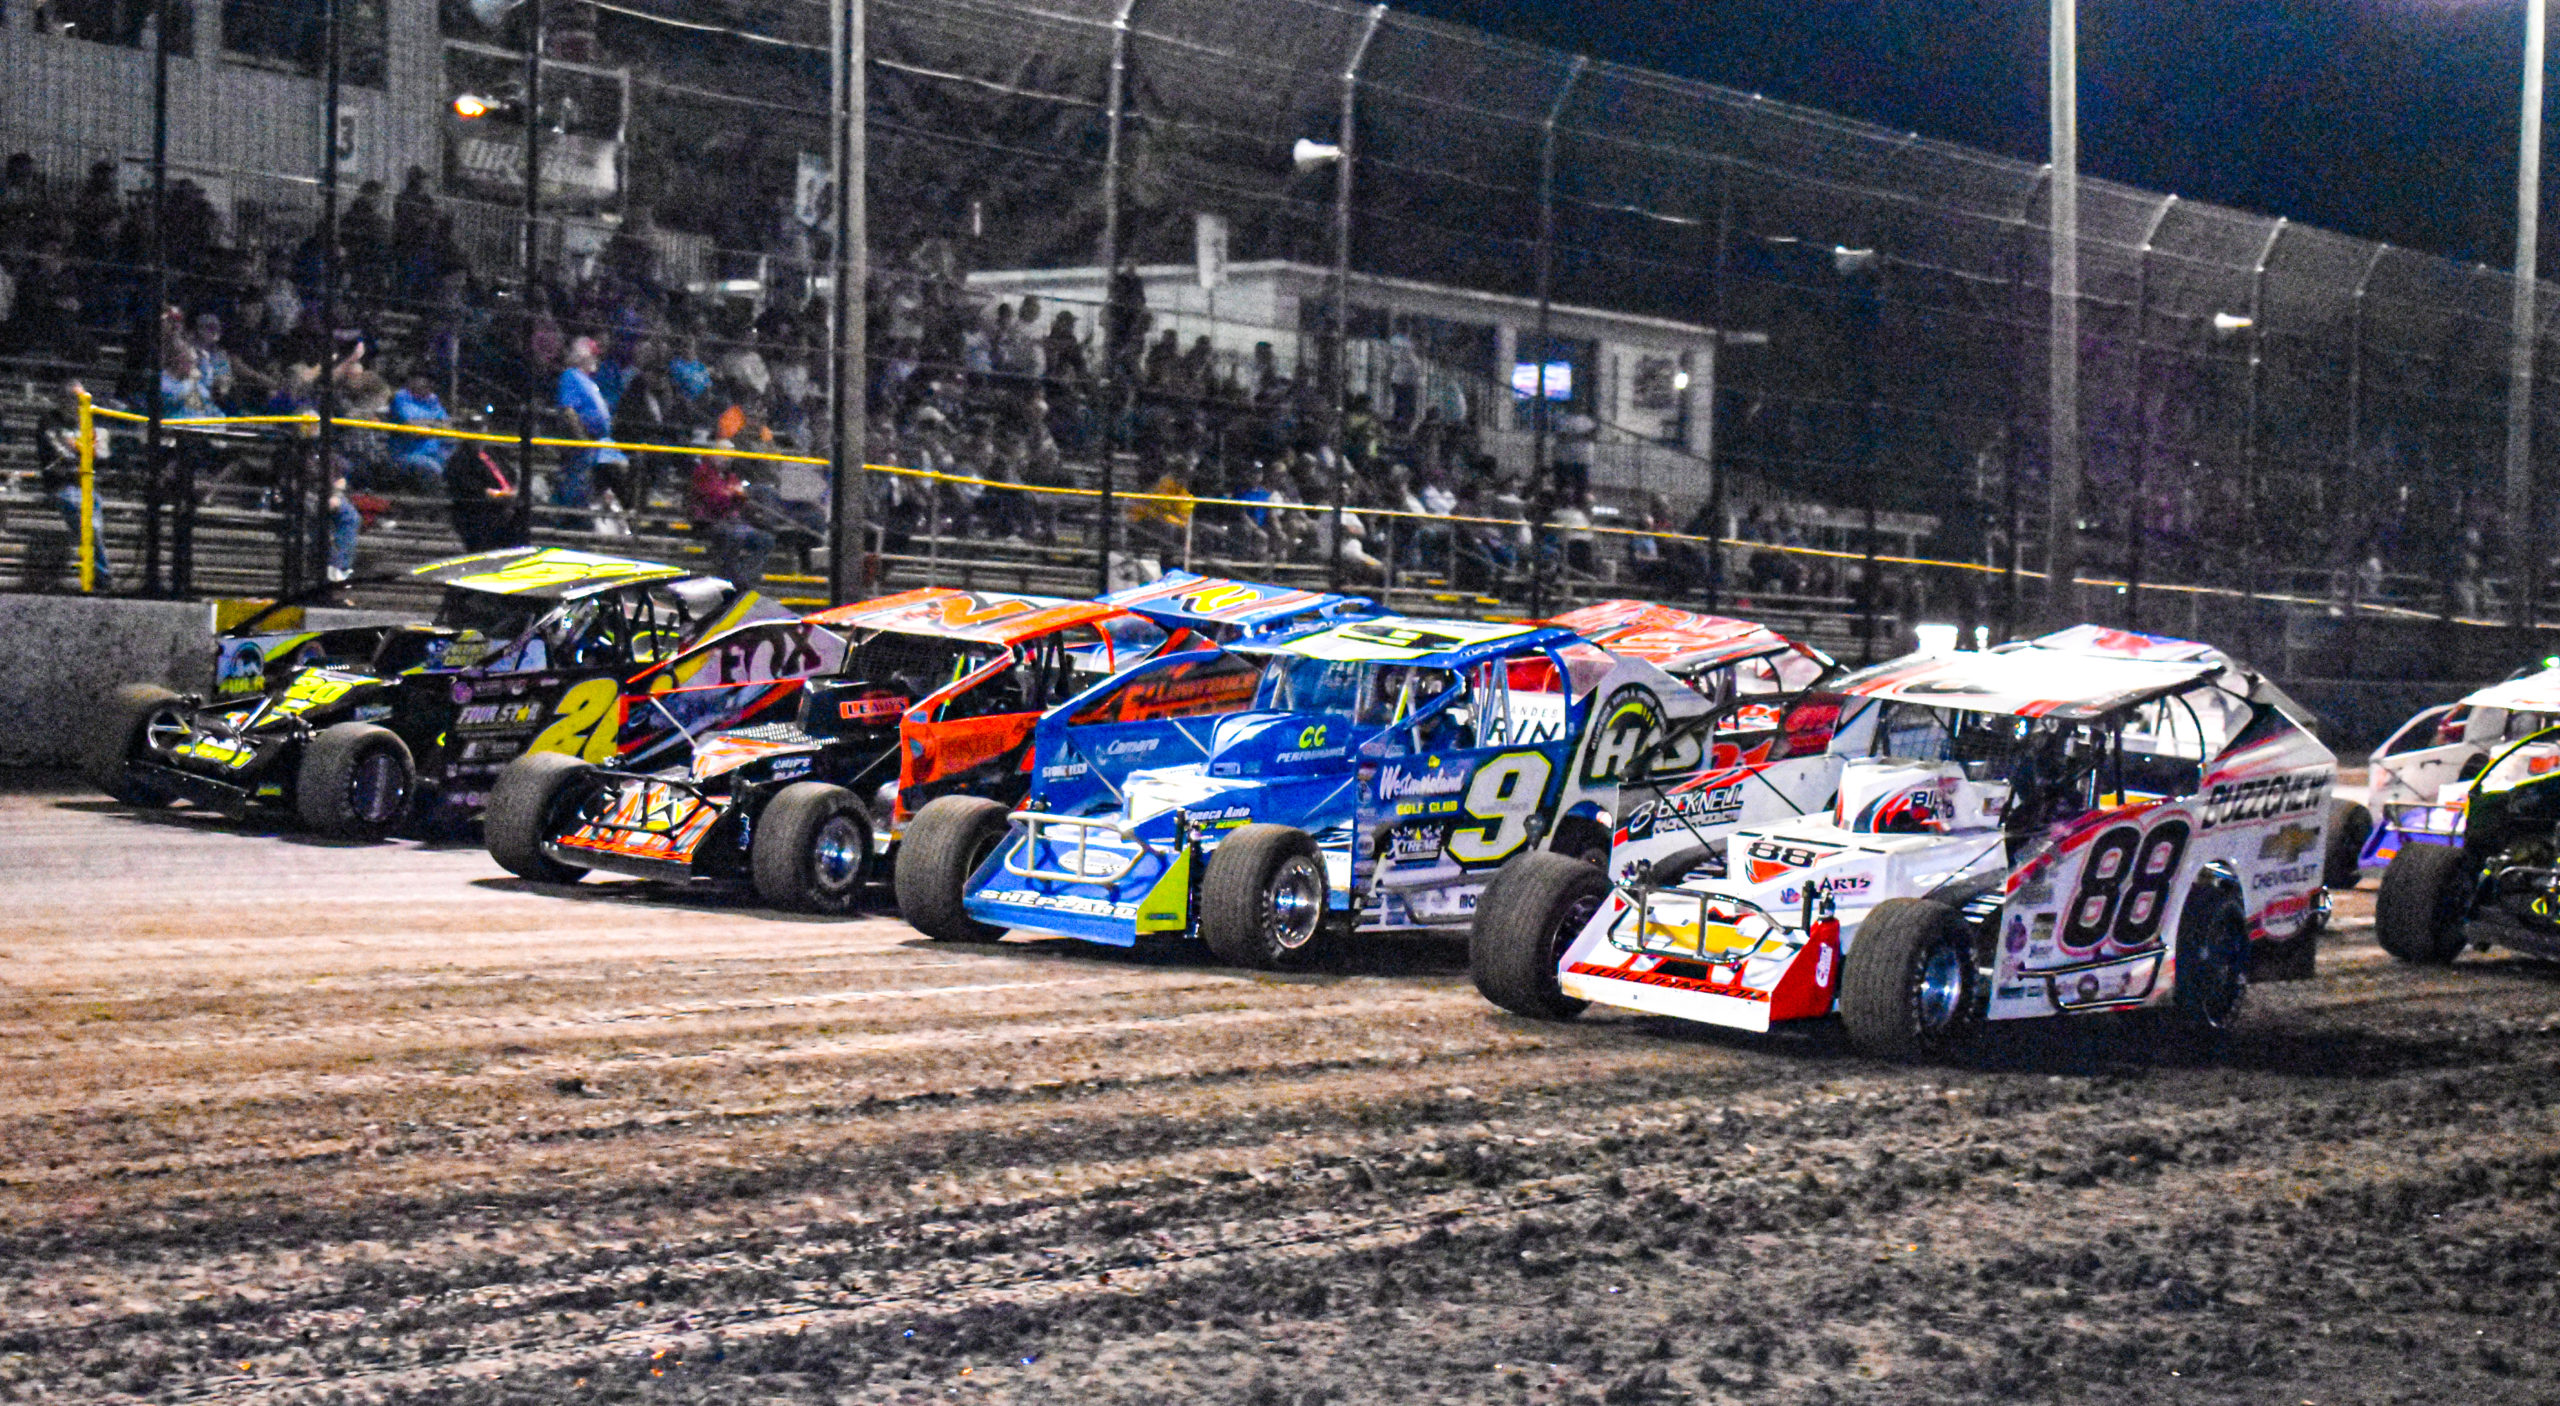 ANOTHER ANIMAL: Higher Purses, New Track Surface Await Super DIRTcar Series at Volusia Speedway Park